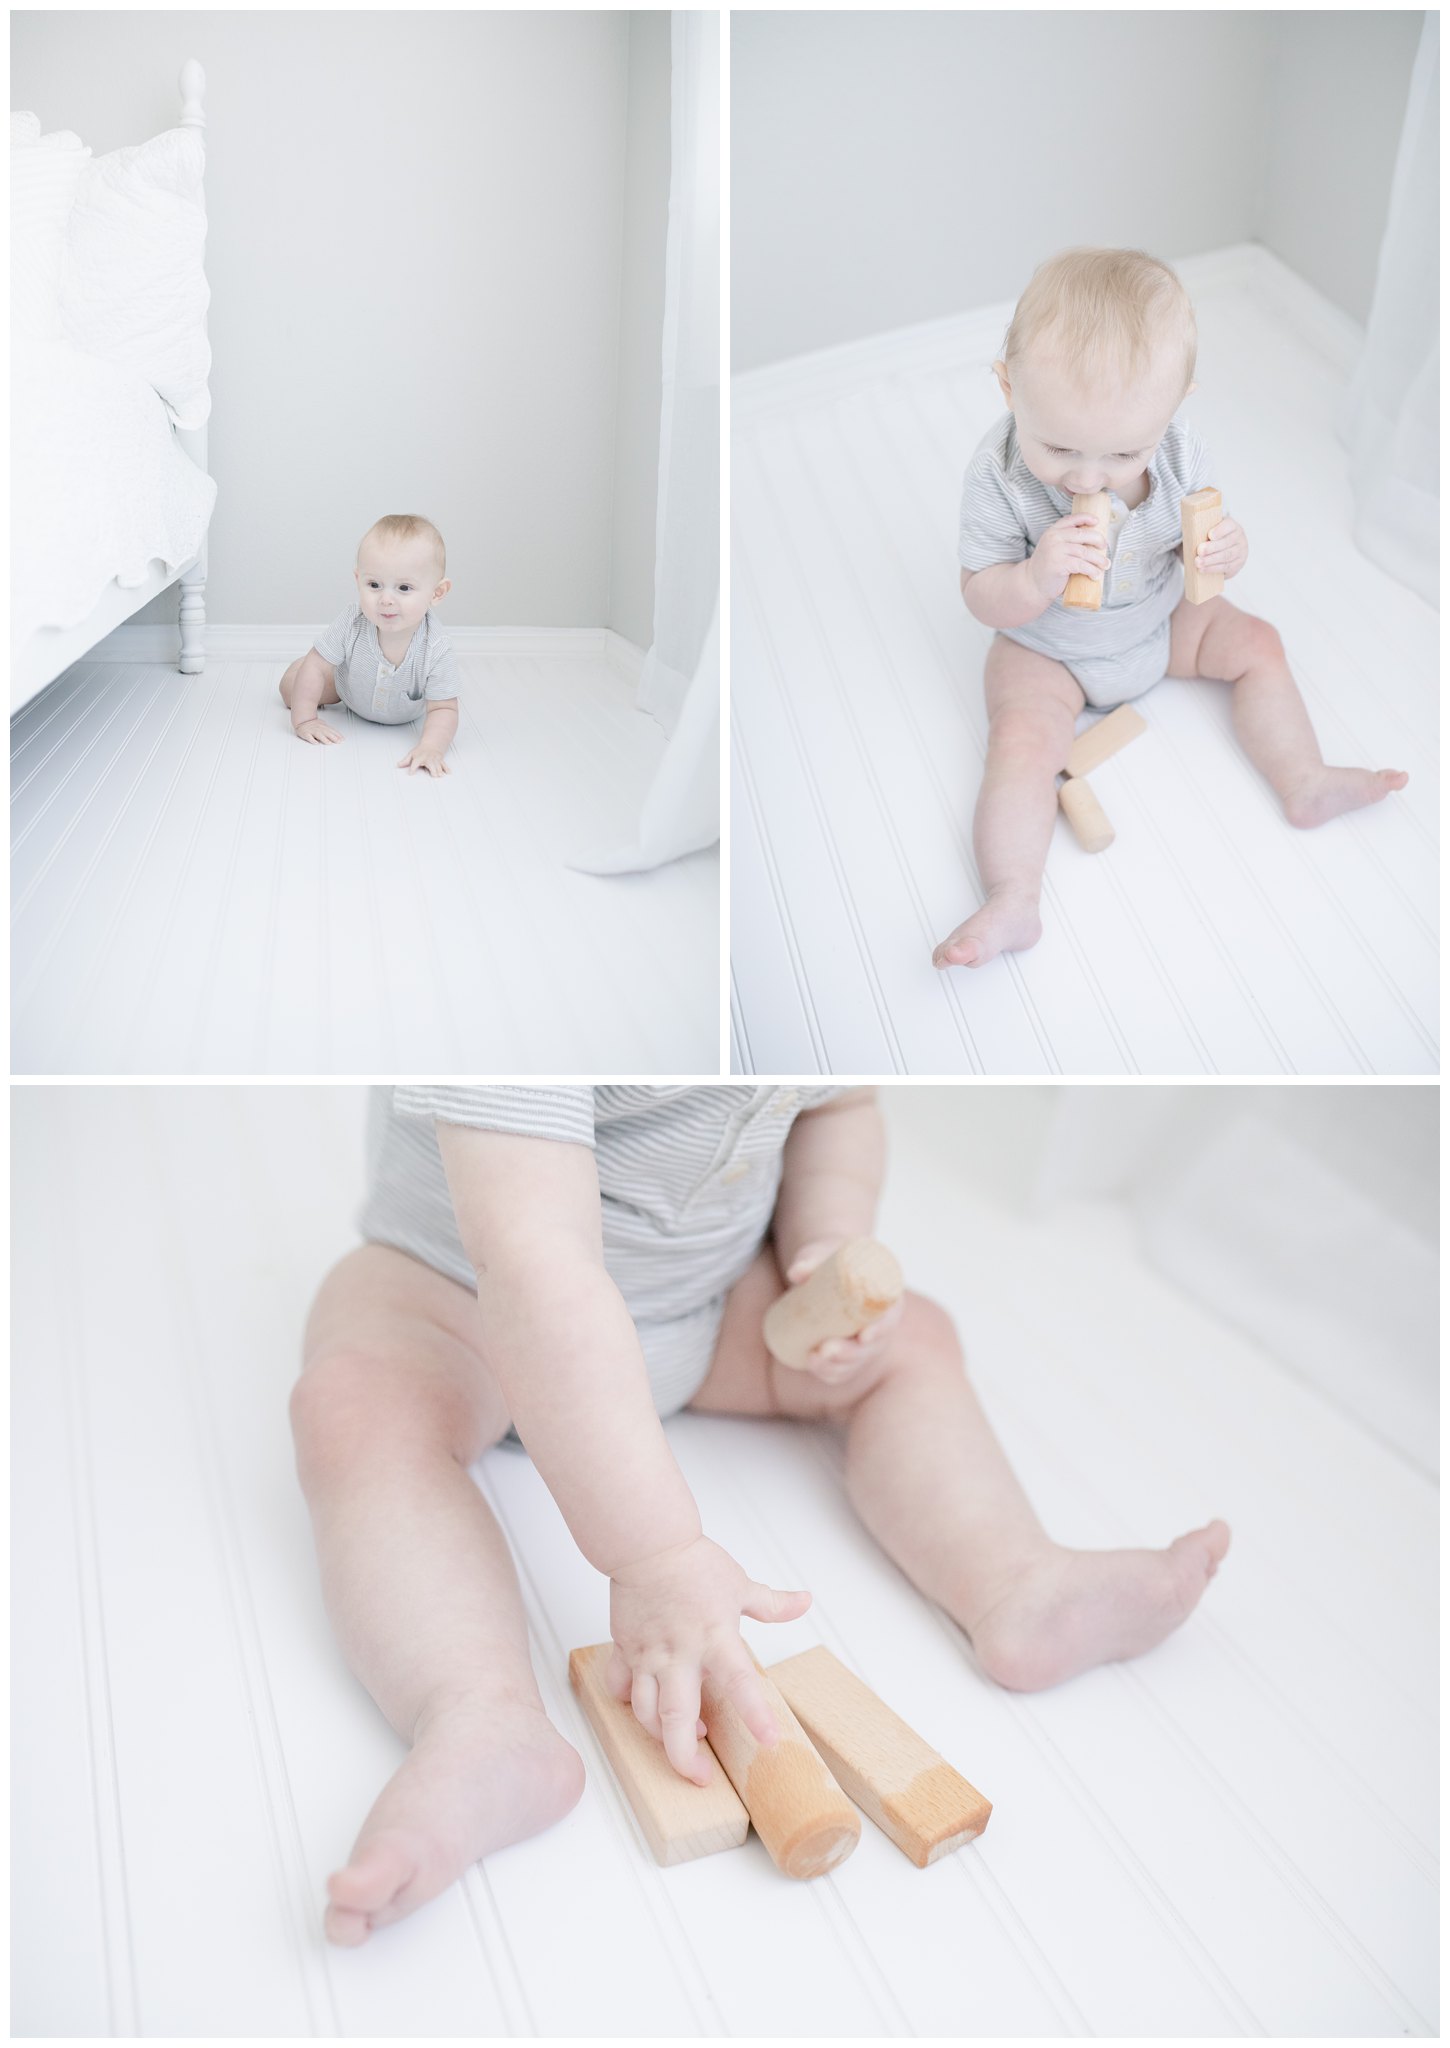 6 months baby photos with baby crawling 